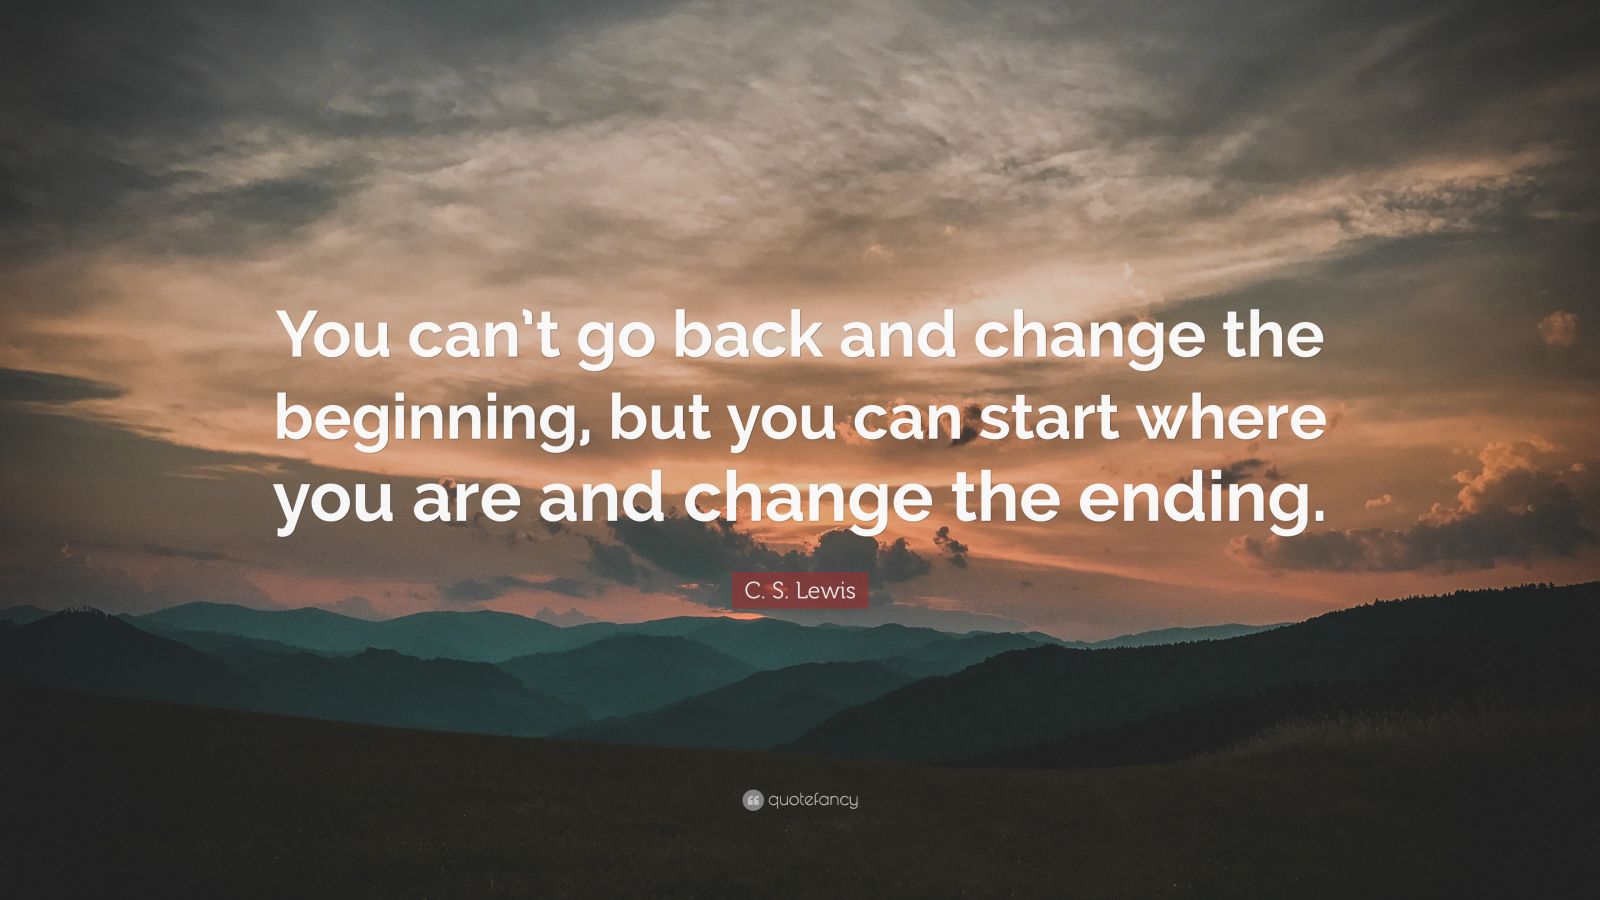 C. S. Lewis Quote: "You can't go back and change the beginning, but you can start where you are ...